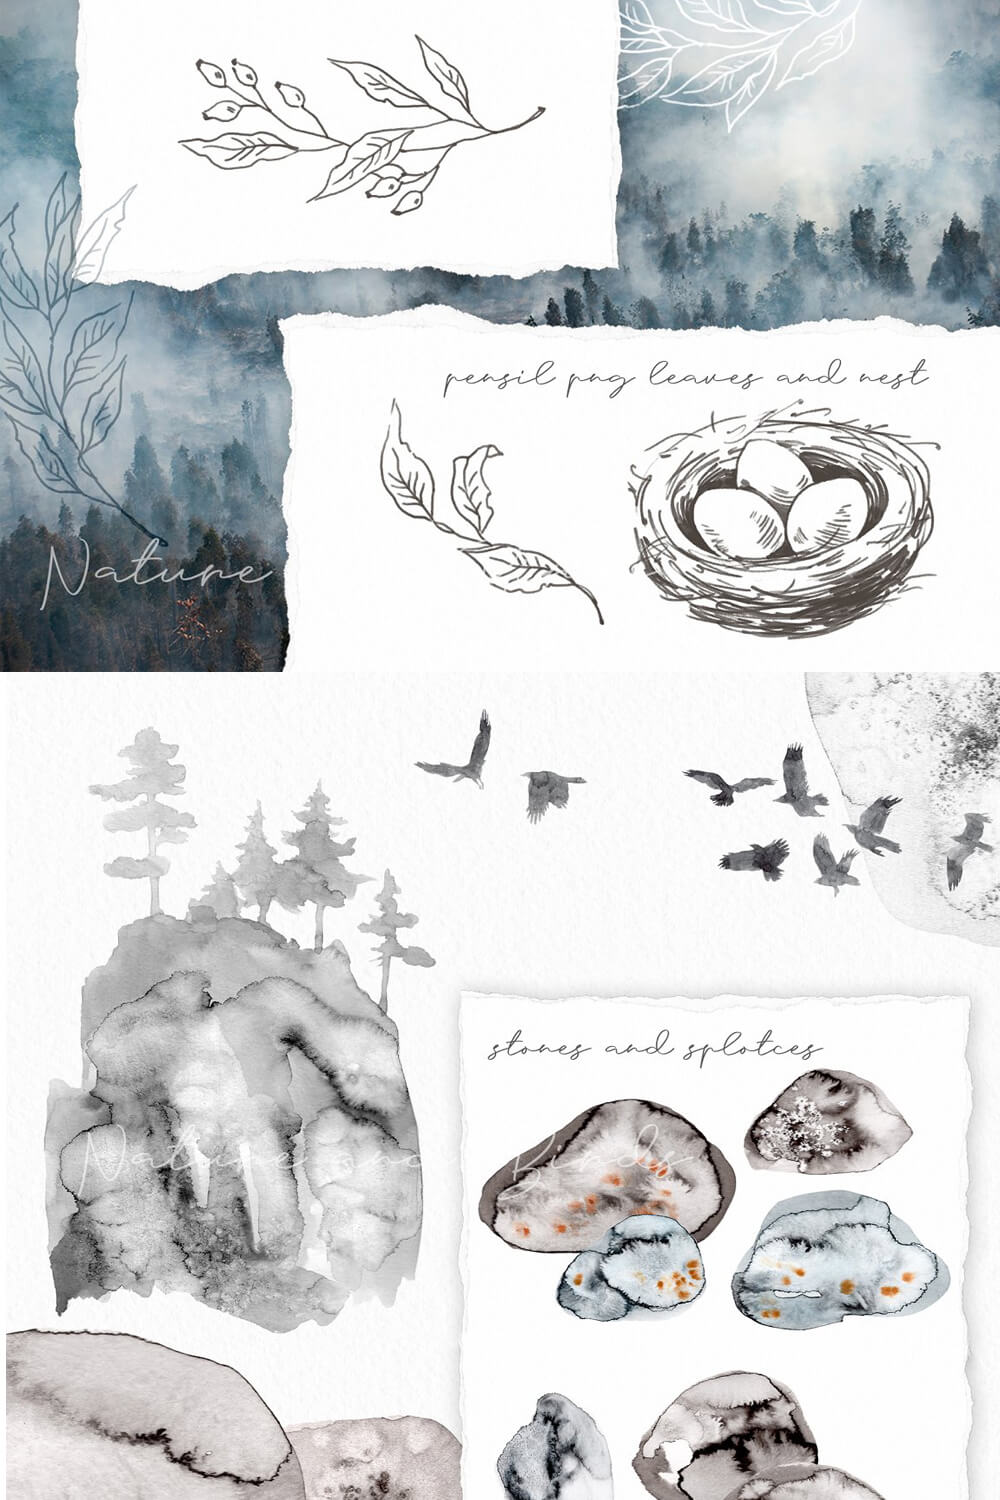 Watercolor drawings of nature: nests, stones and forests.